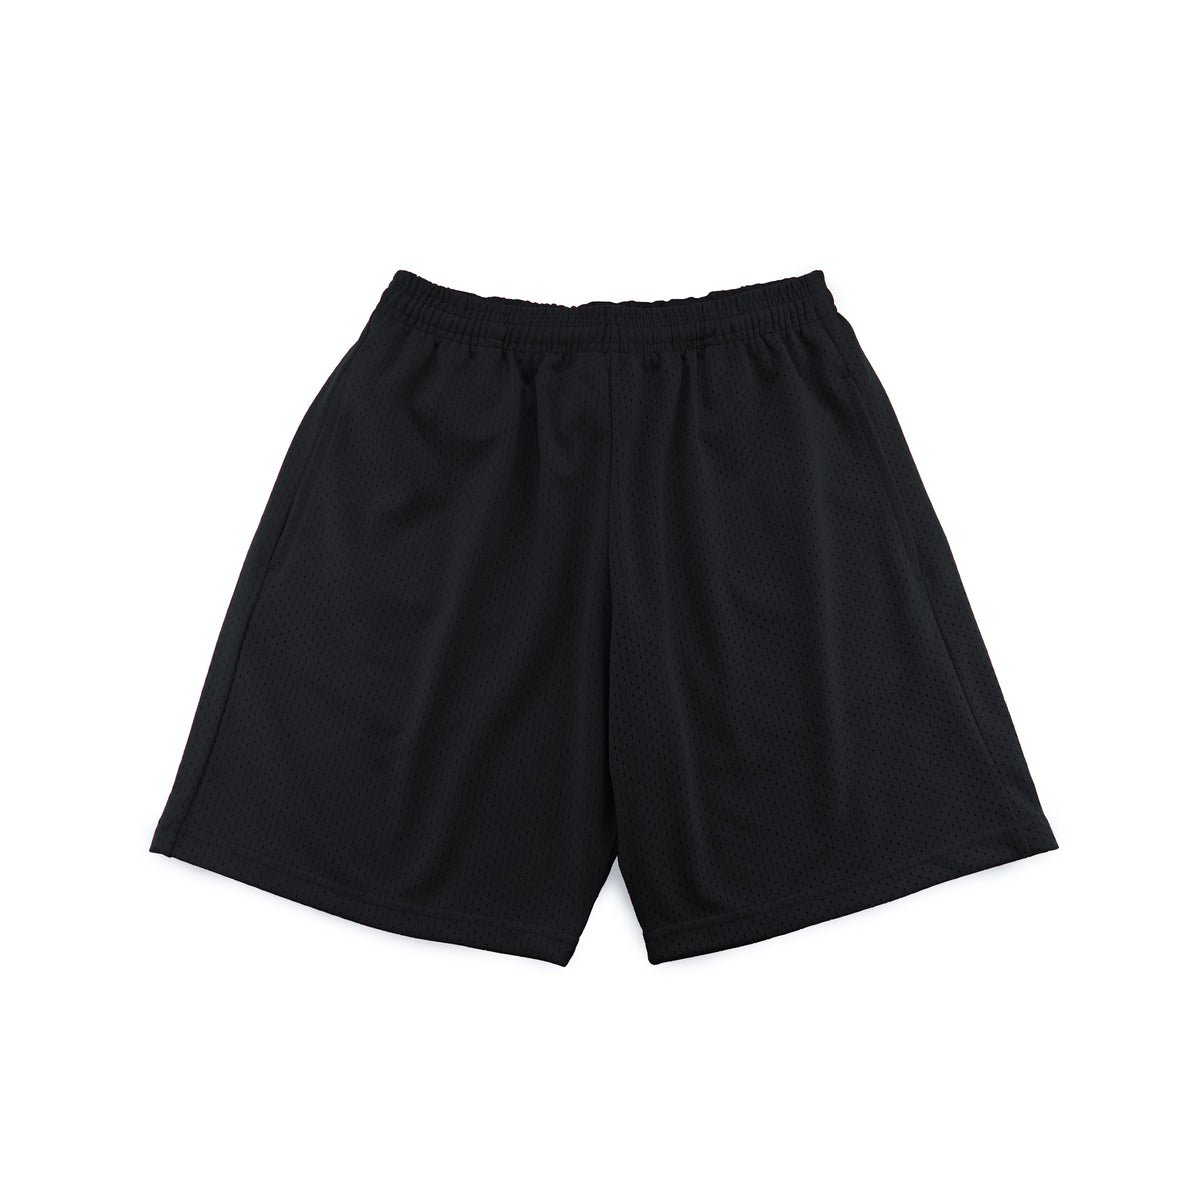 BaggyMeshShoprivate brand by s.f.s Mesh Shorts Black